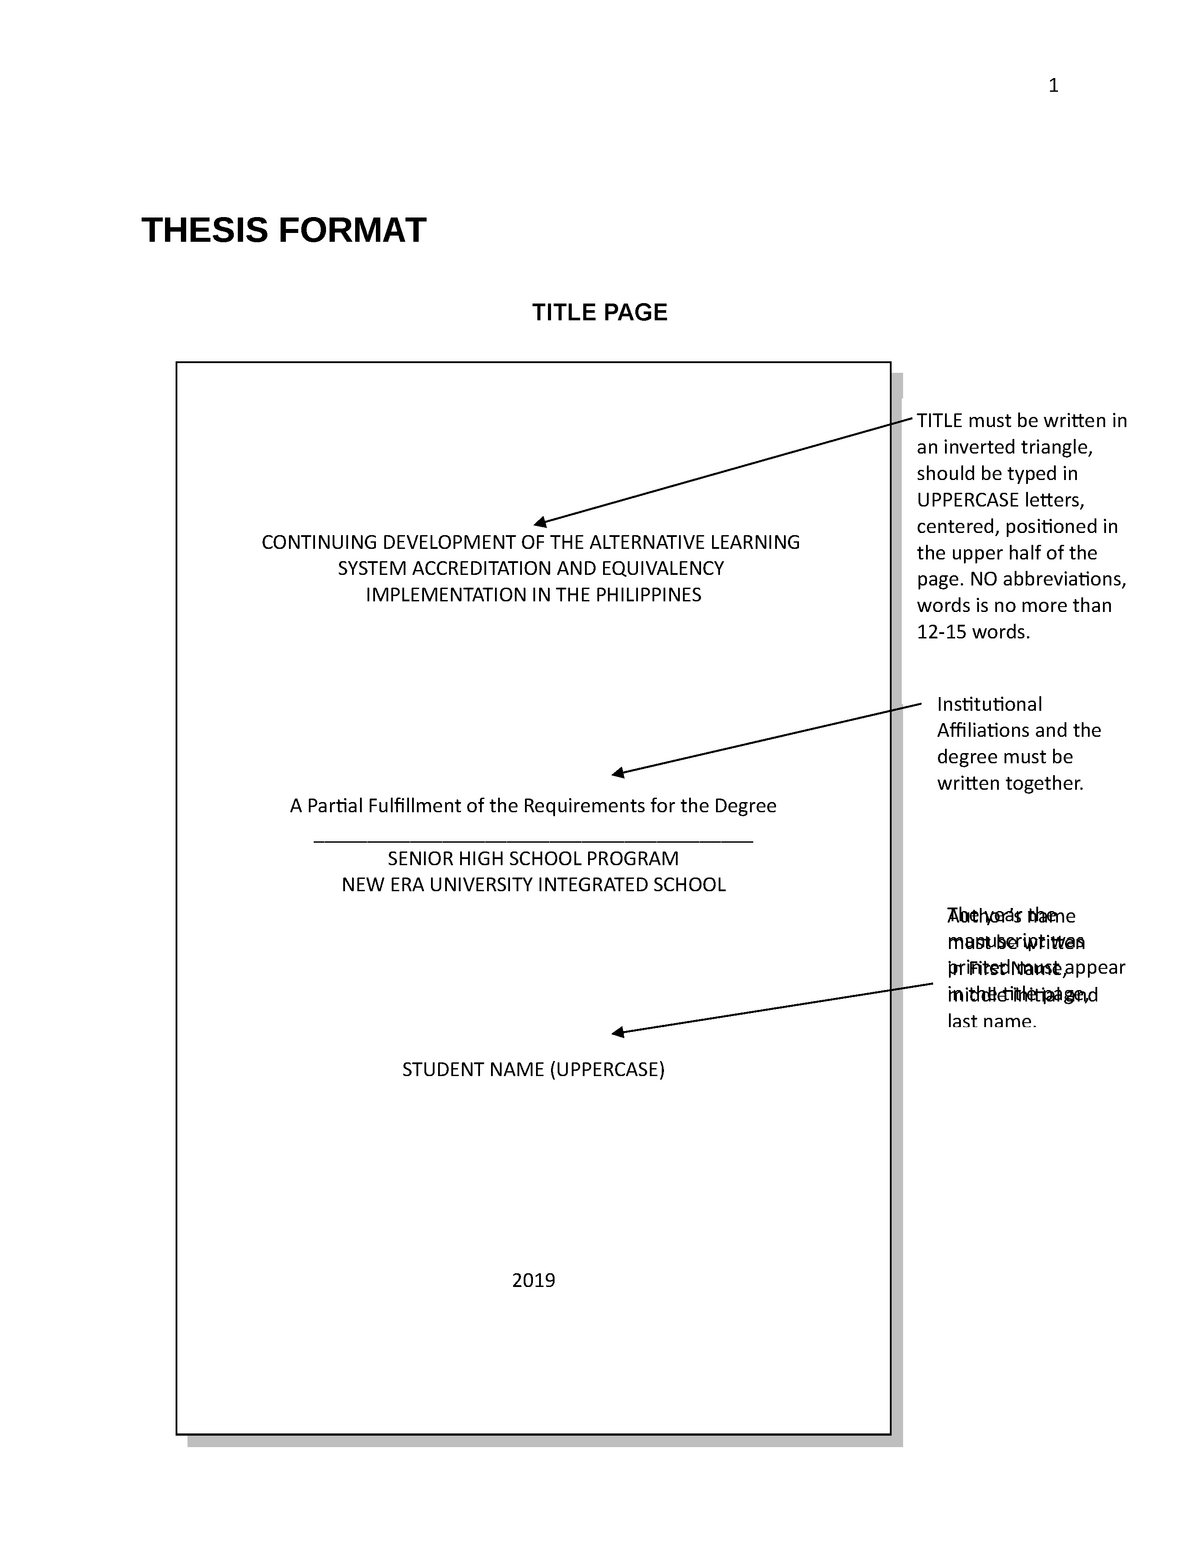 font for thesis title